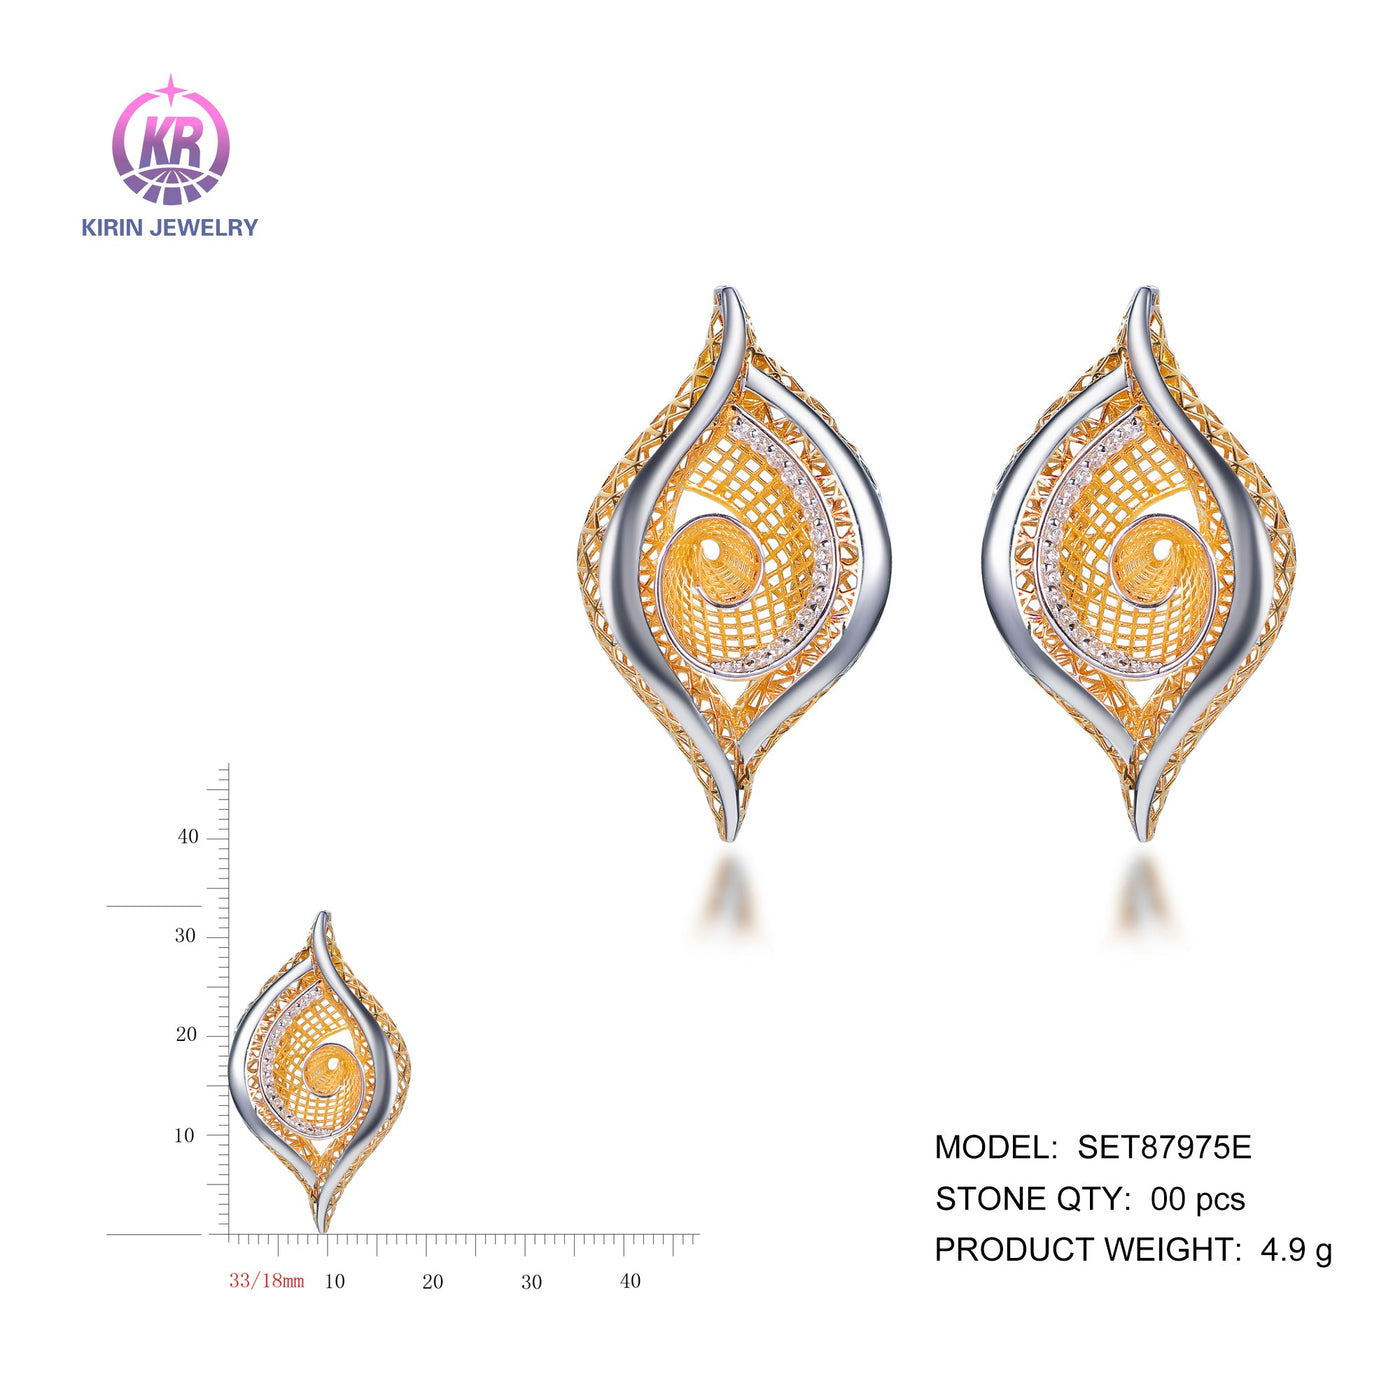 925 silver earrings with 2-tone plating rhodium and 14K gold SET87975E Kirin Jewelry